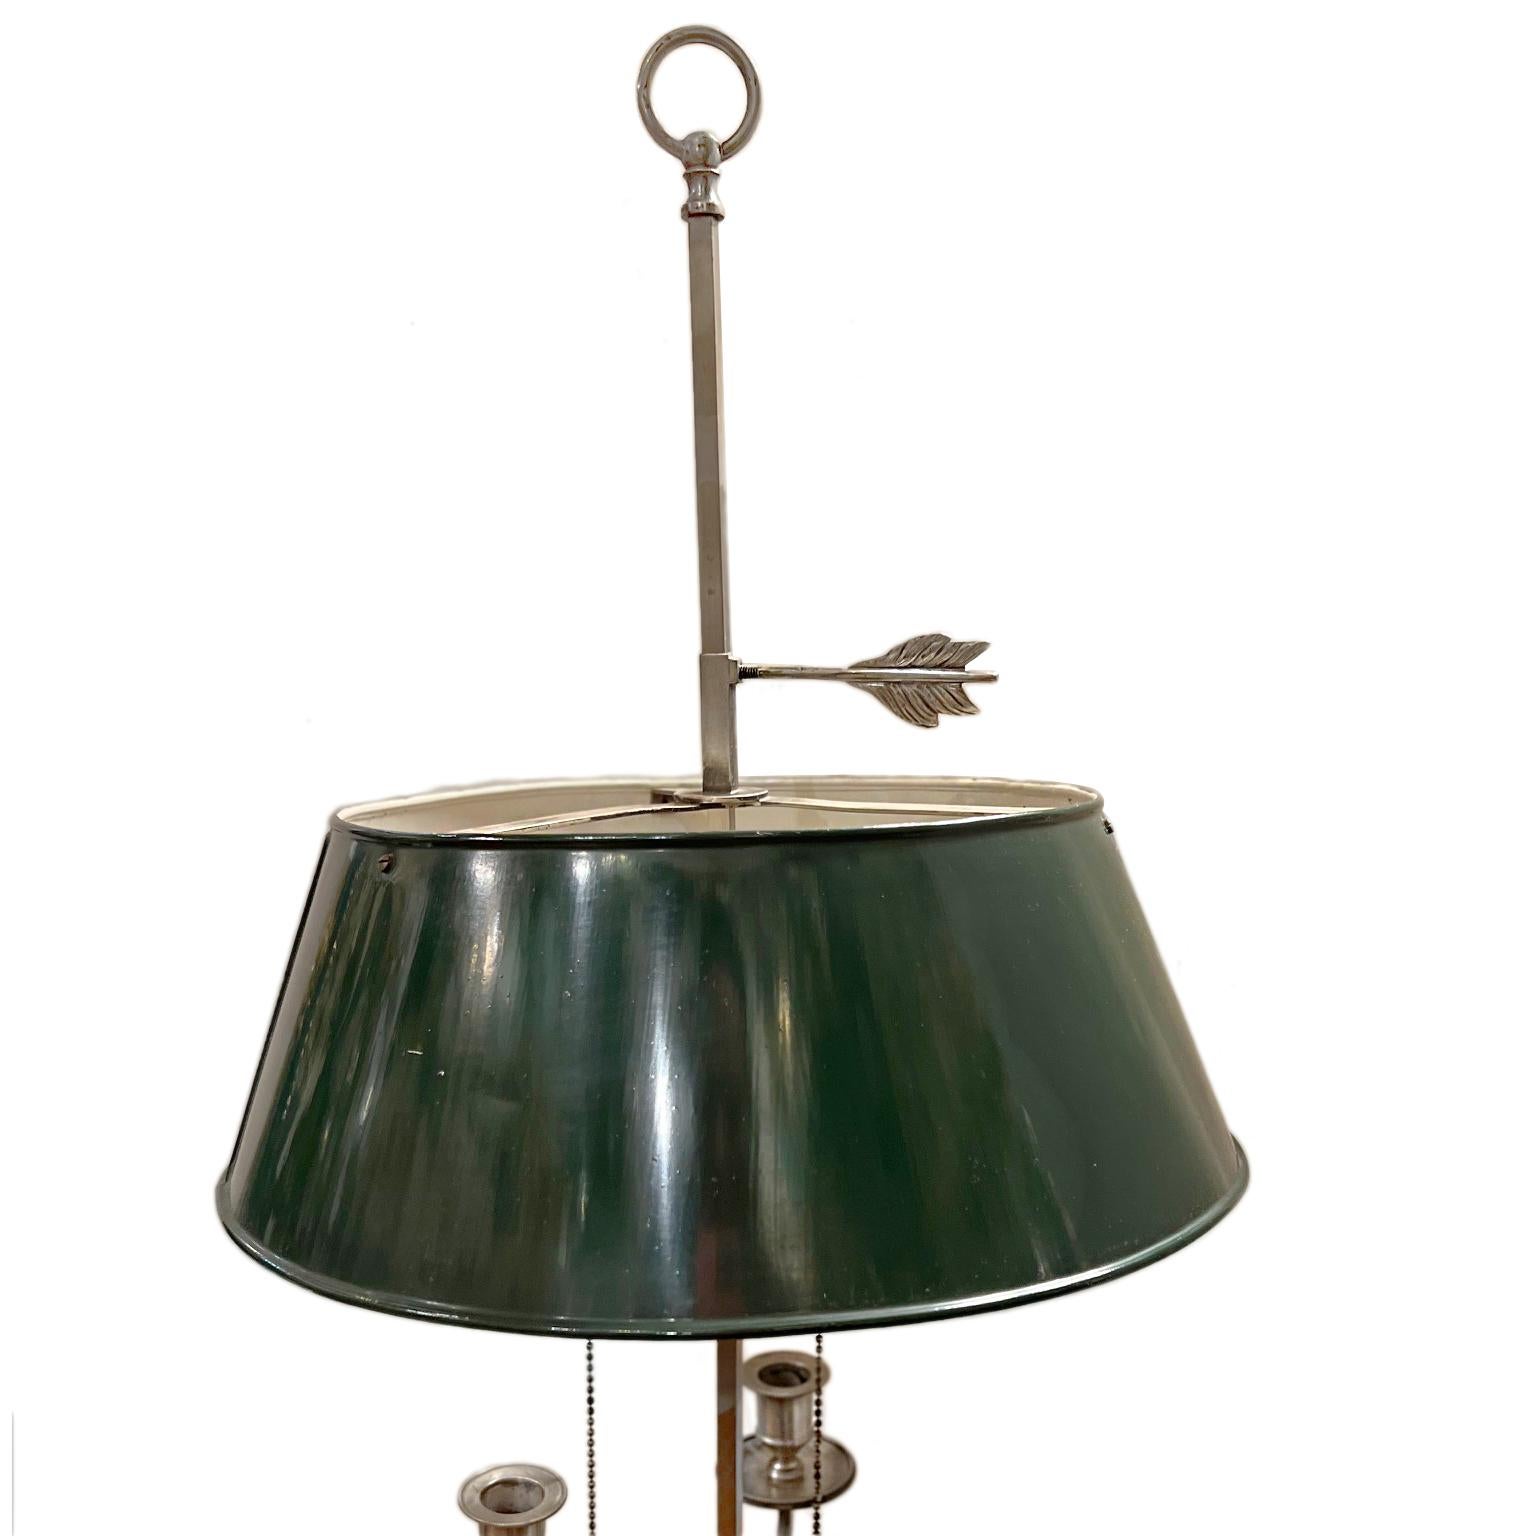 A large French circa 1920's silver plated Bouillotte lamp with tole shade and original patina.

Measurements:
Diameter: 14